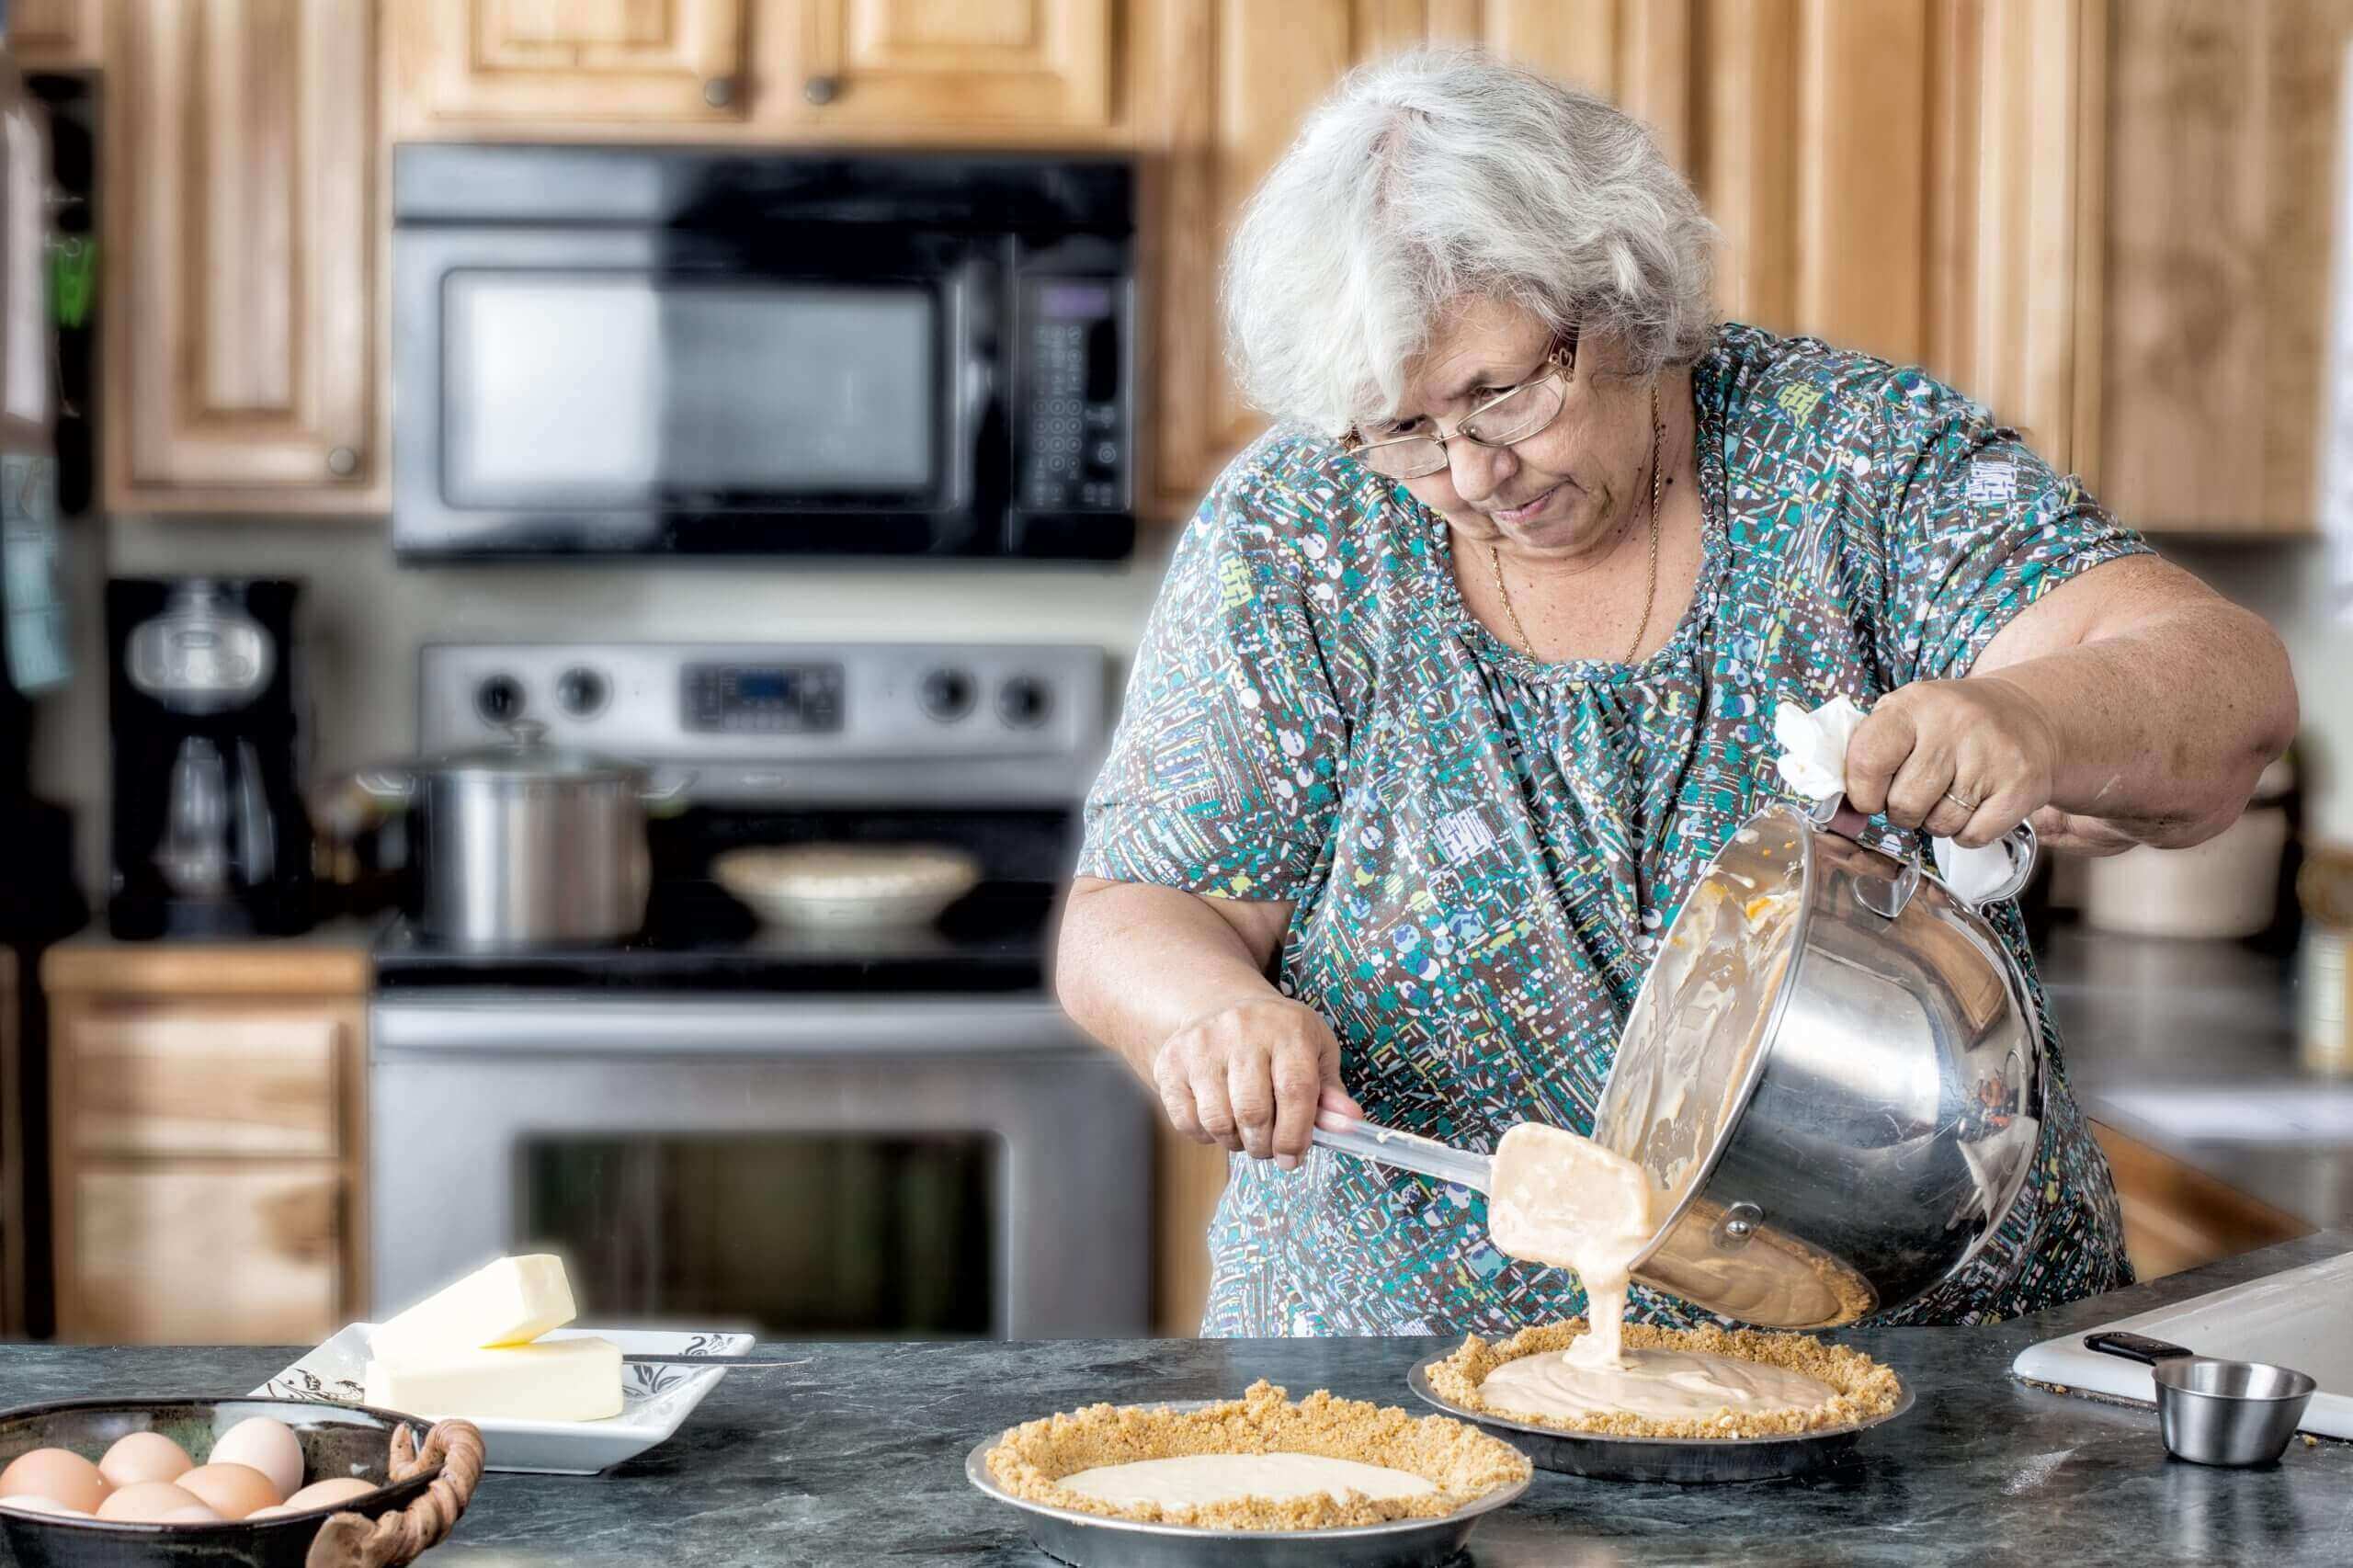 Older woman with dementia baking at home in kitchen